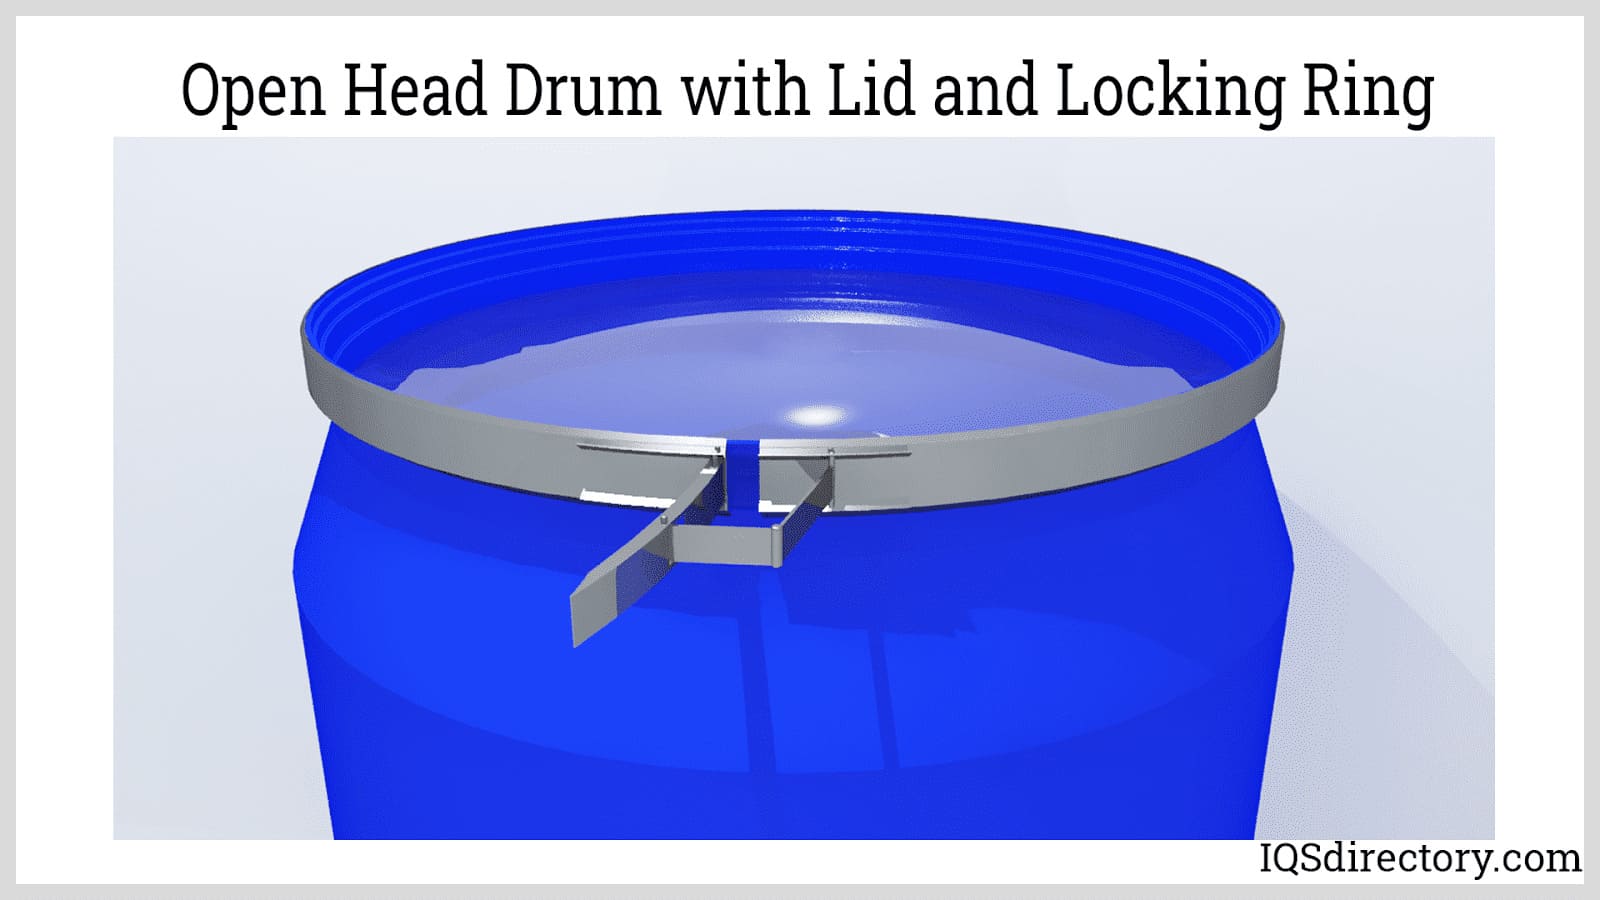 Open Head Drum with Lid and Locking Ring